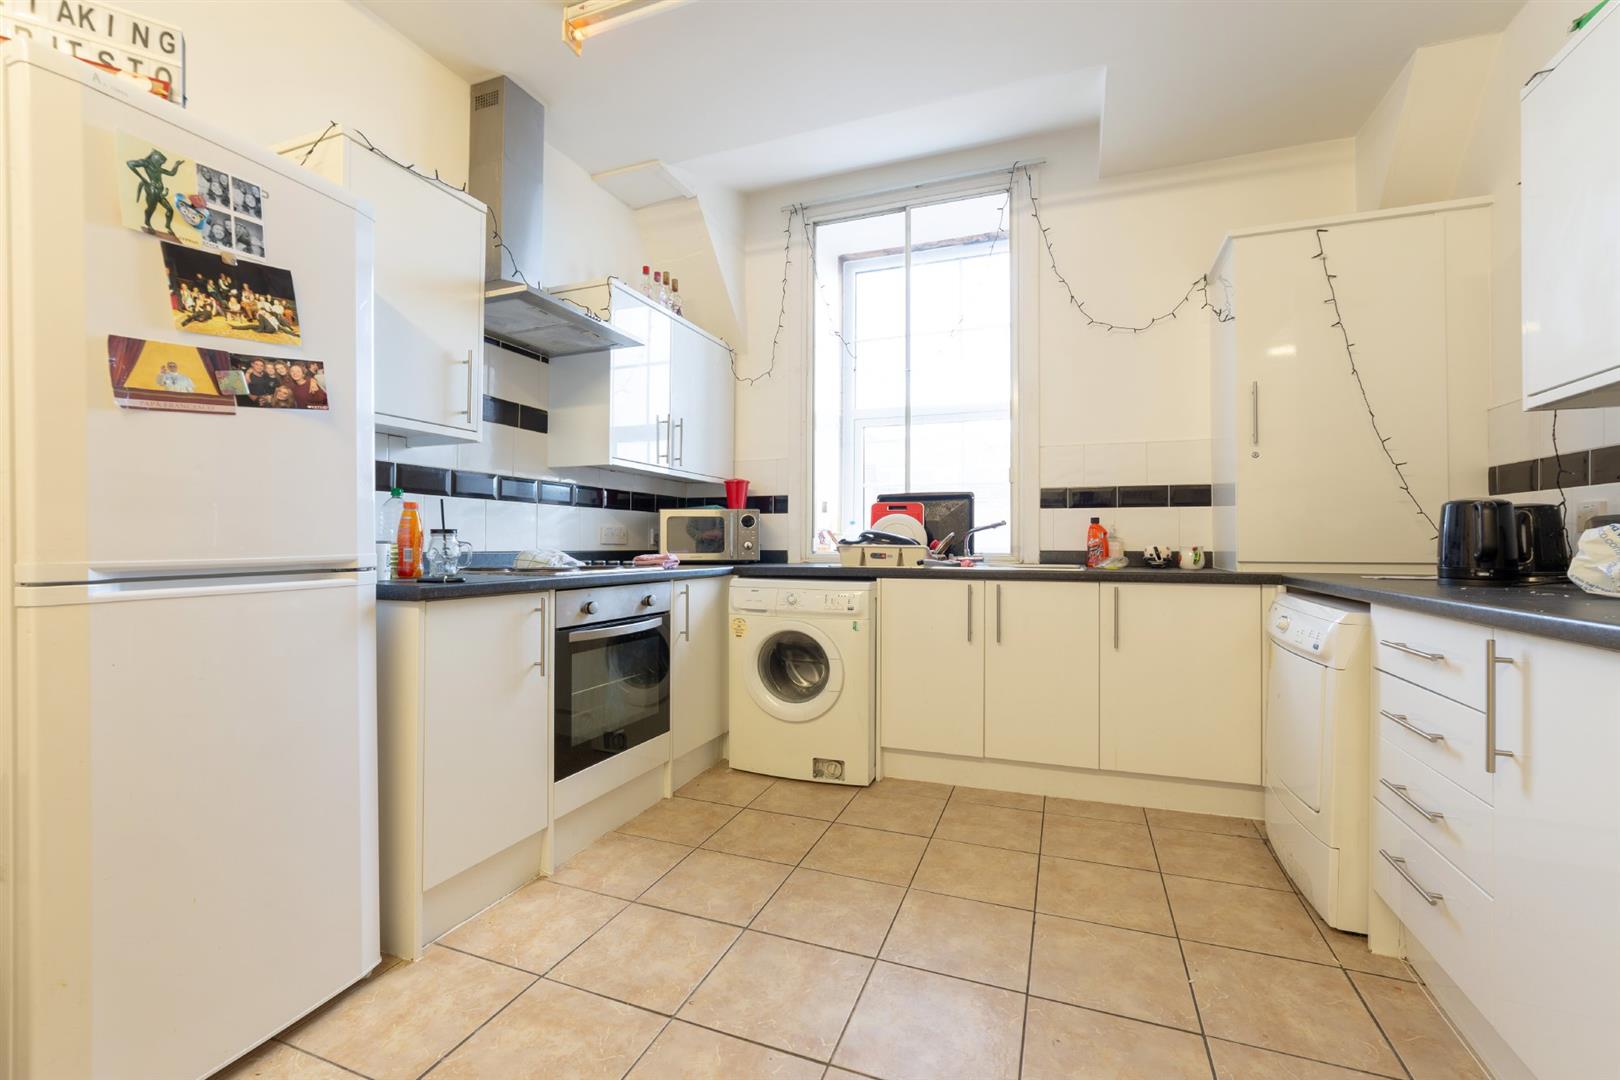 4 bed apartment to rent in Clayton Street West, Newcastle Upon Tyne  - Property Image 2